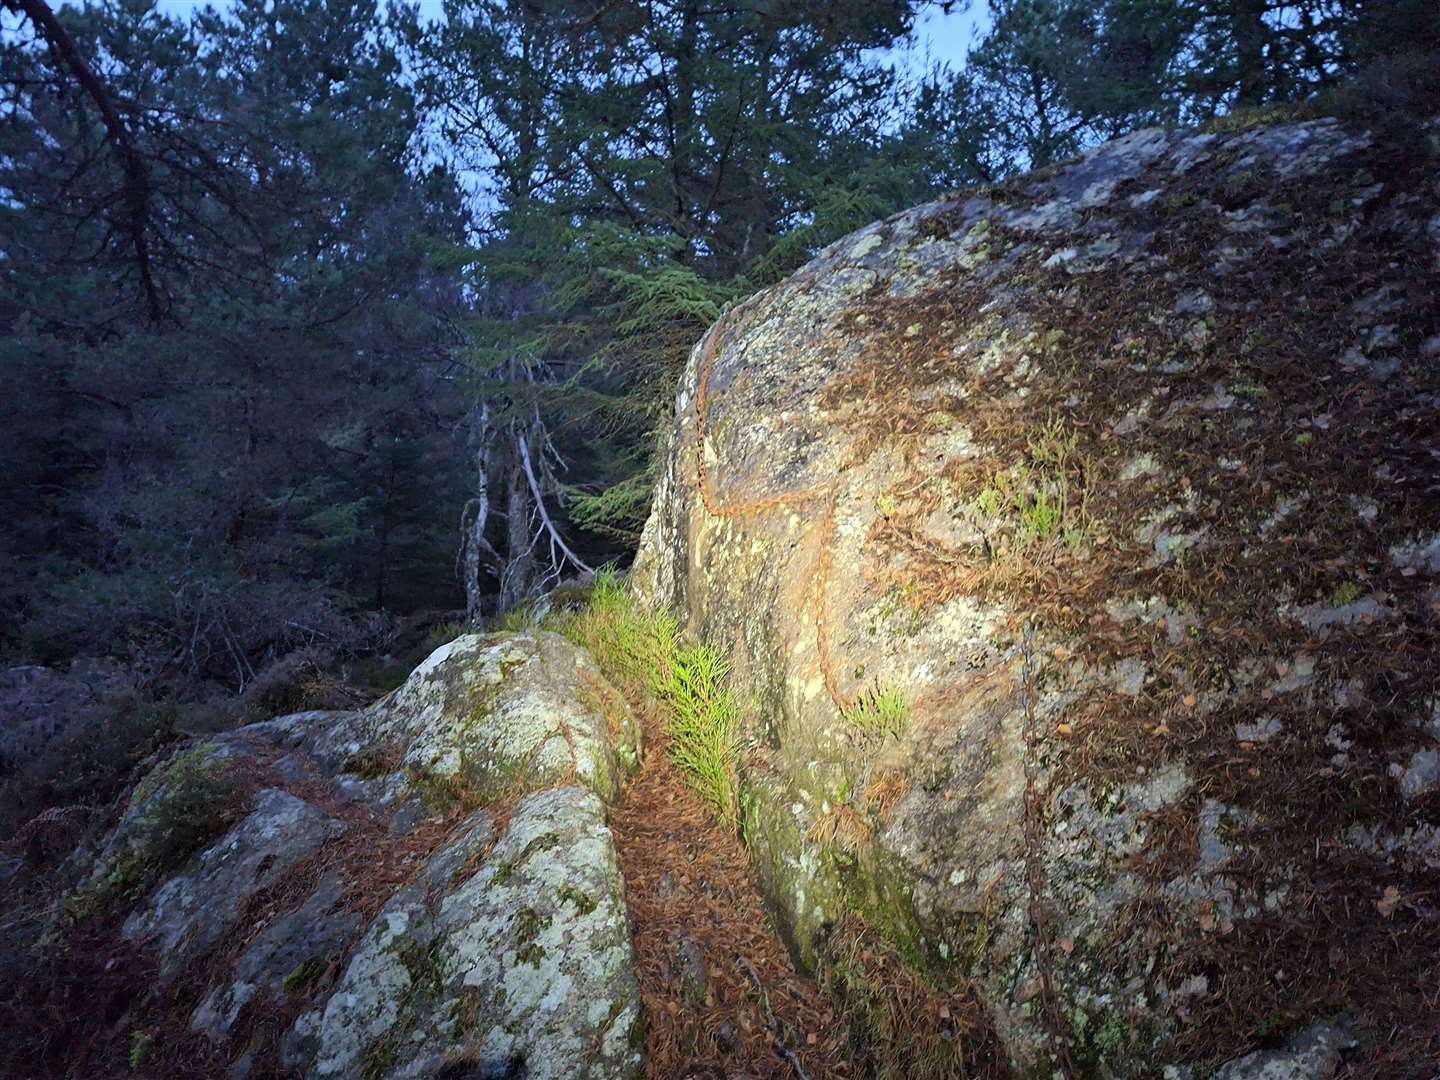 The chain rock lit up by light from the headtorch.